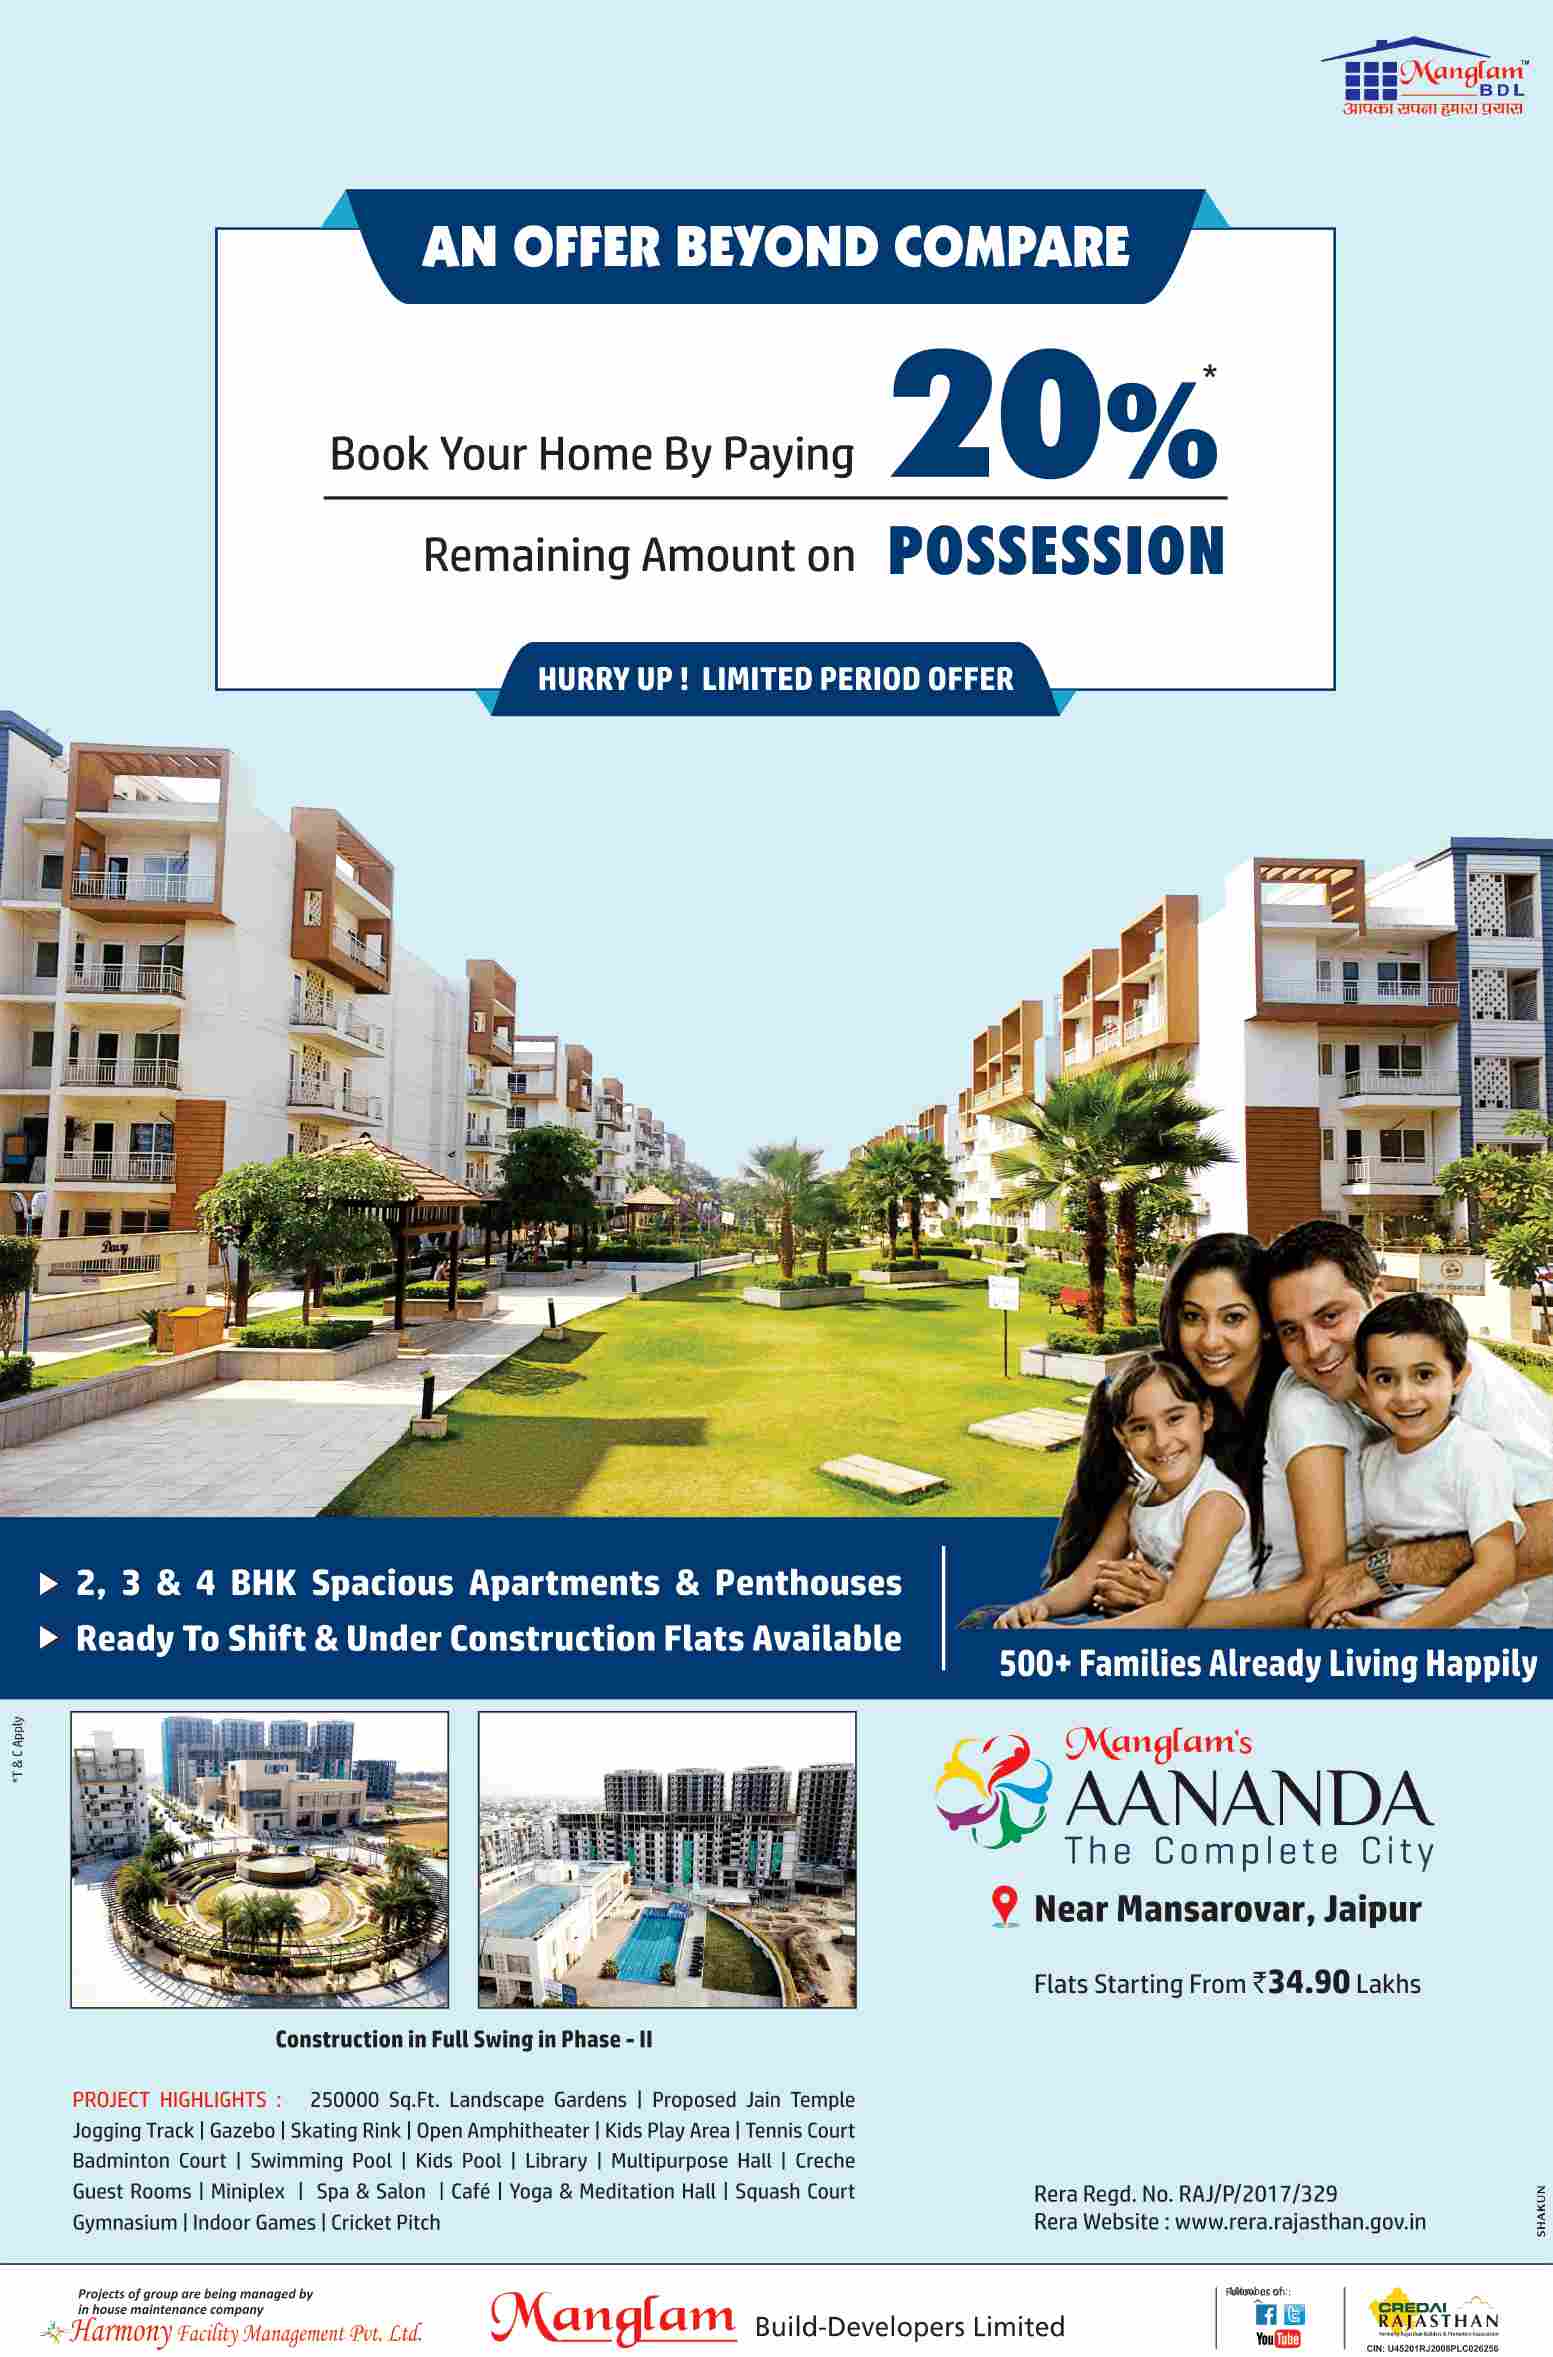 Book by paying 20% and rest on possession at Manglam Aananda in Jaipur Update